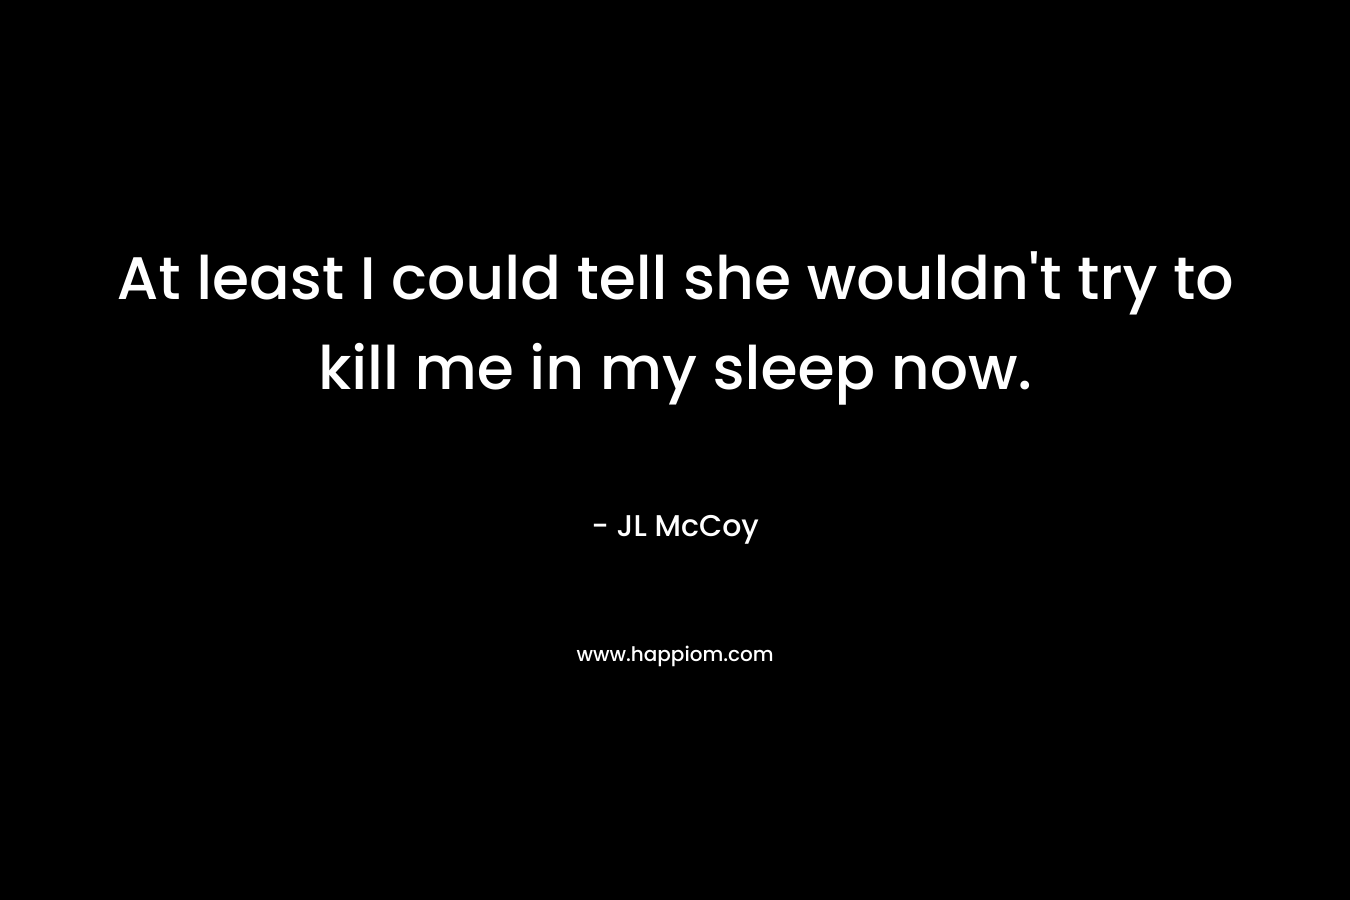 At least I could tell she wouldn’t try to kill me in my sleep now. – JL McCoy